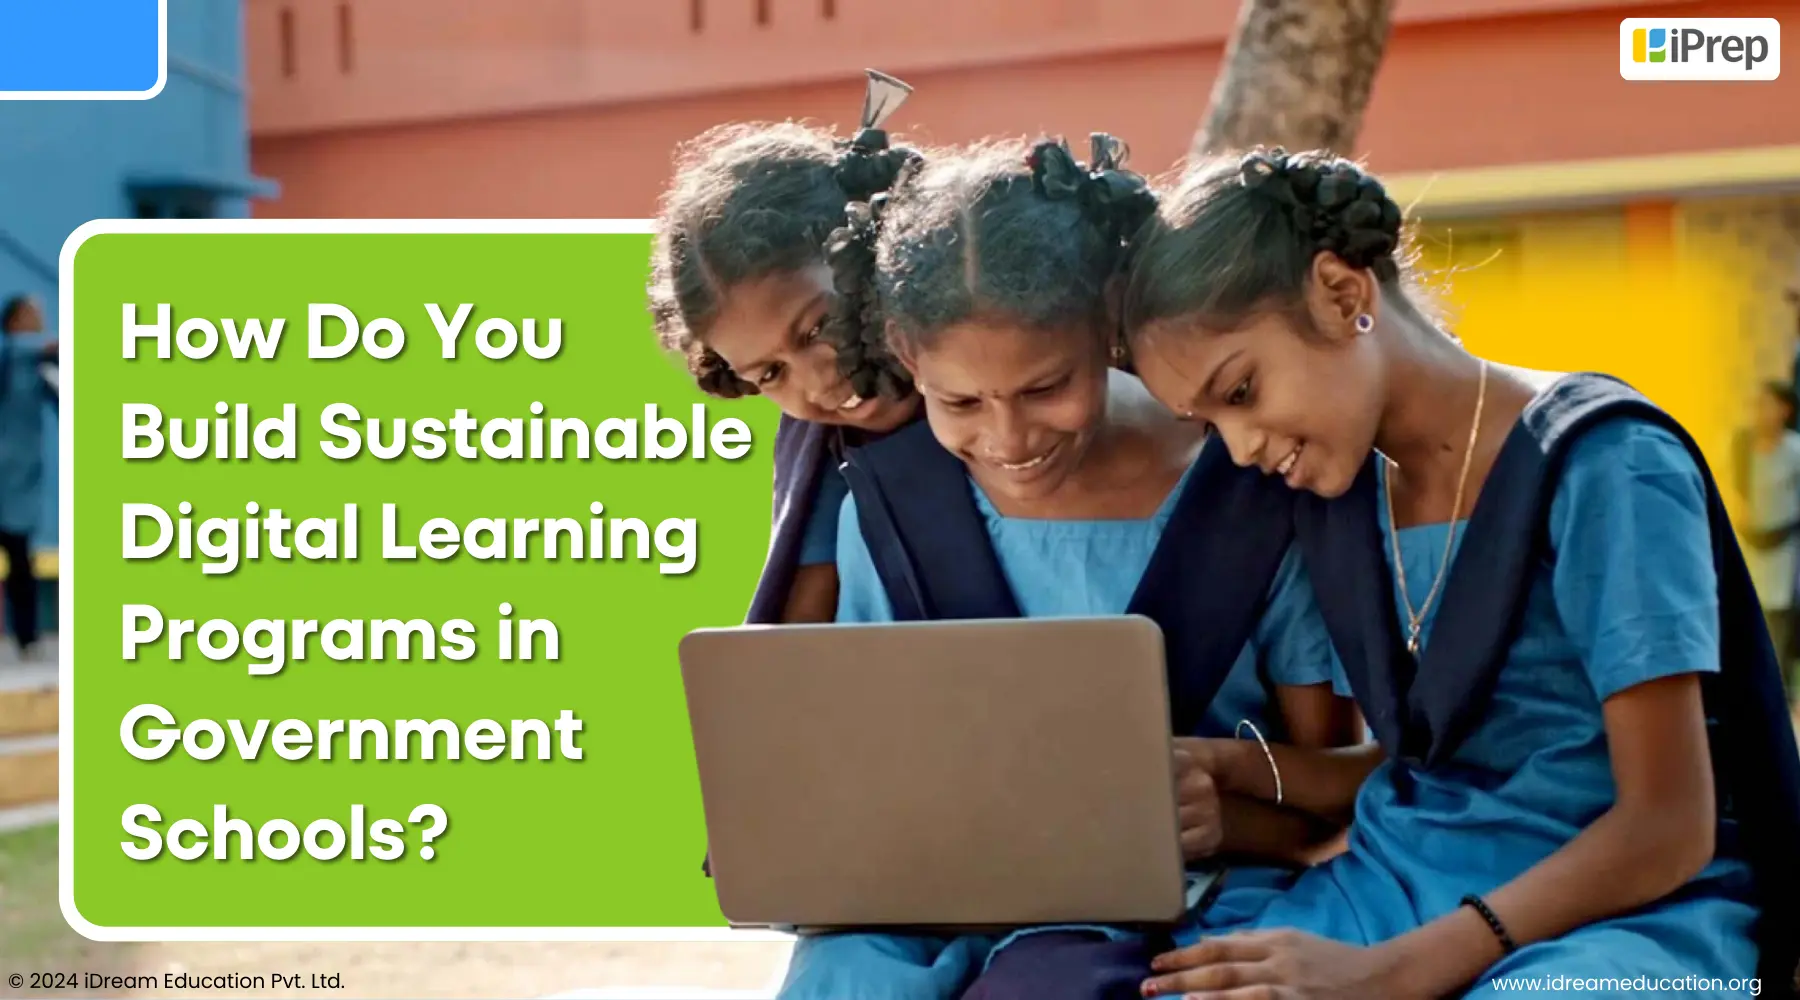 Cover Image by iDream Education Guiding through the way to build sustainable digital learning programs in government schools